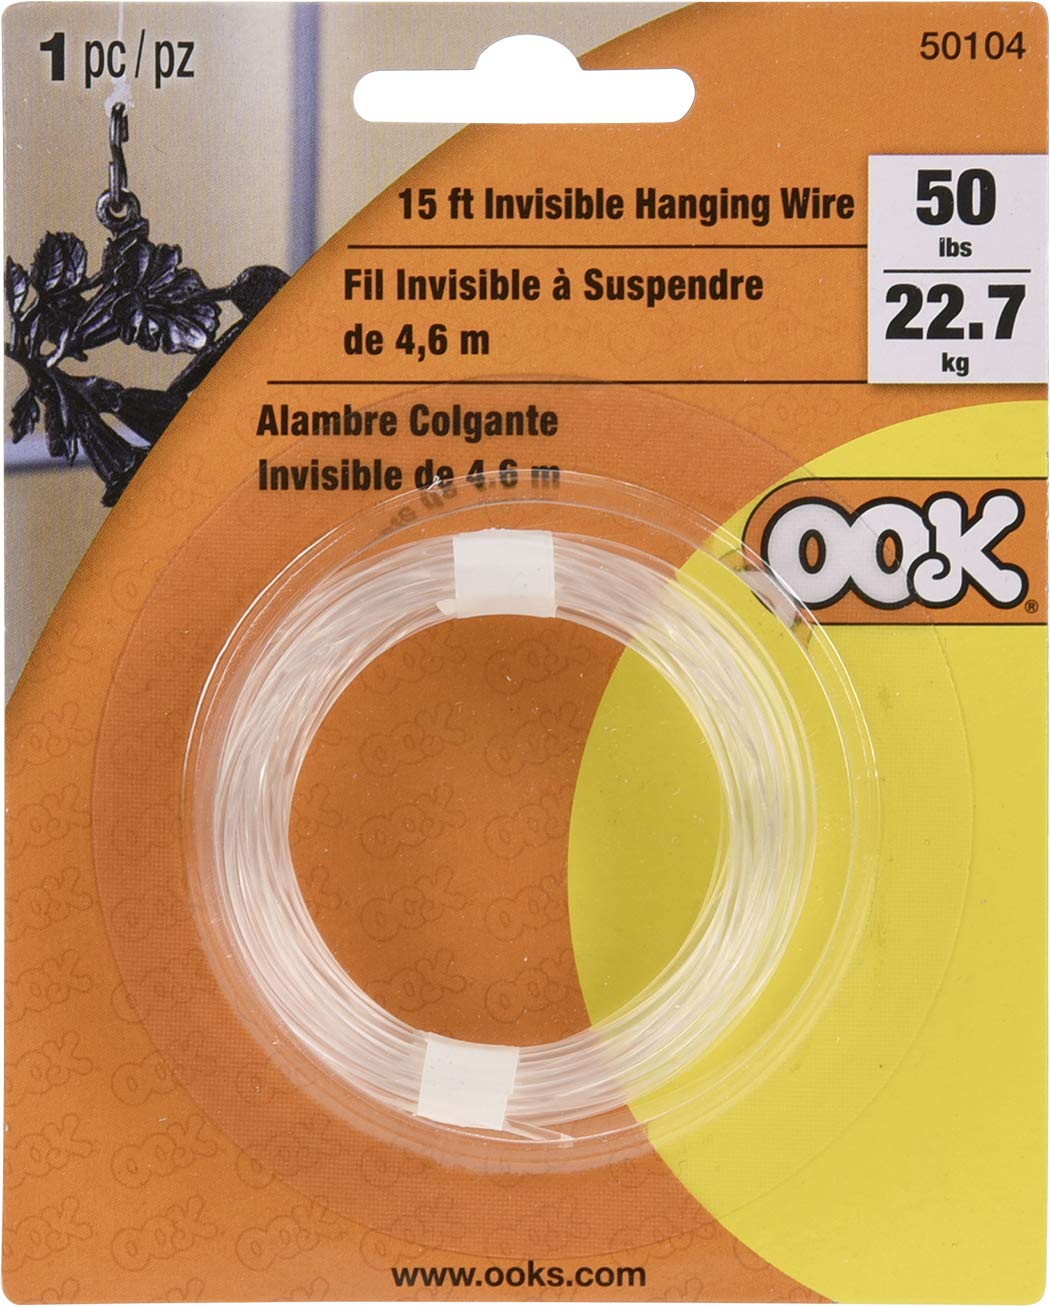 OOK 15 ft. Invisible Hanging Wire, 50 lbs. Capacity, Self Tying Wires, Ideal for Picture Hanging and Planters